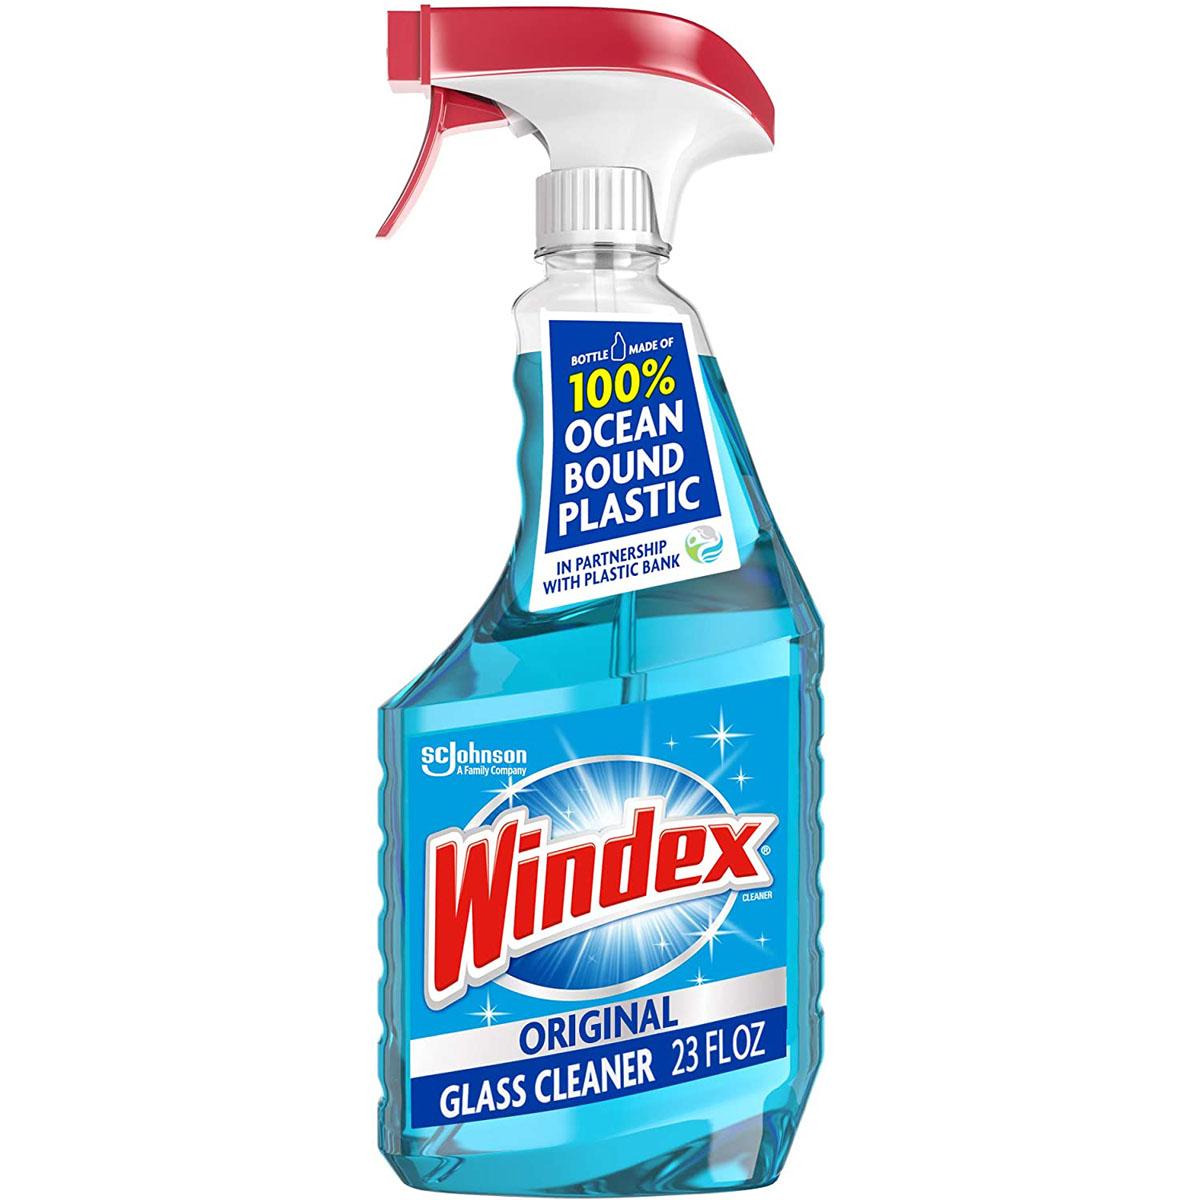 Windex Glass and Window Cleaner Spray Bottle for $2.06 Shipped